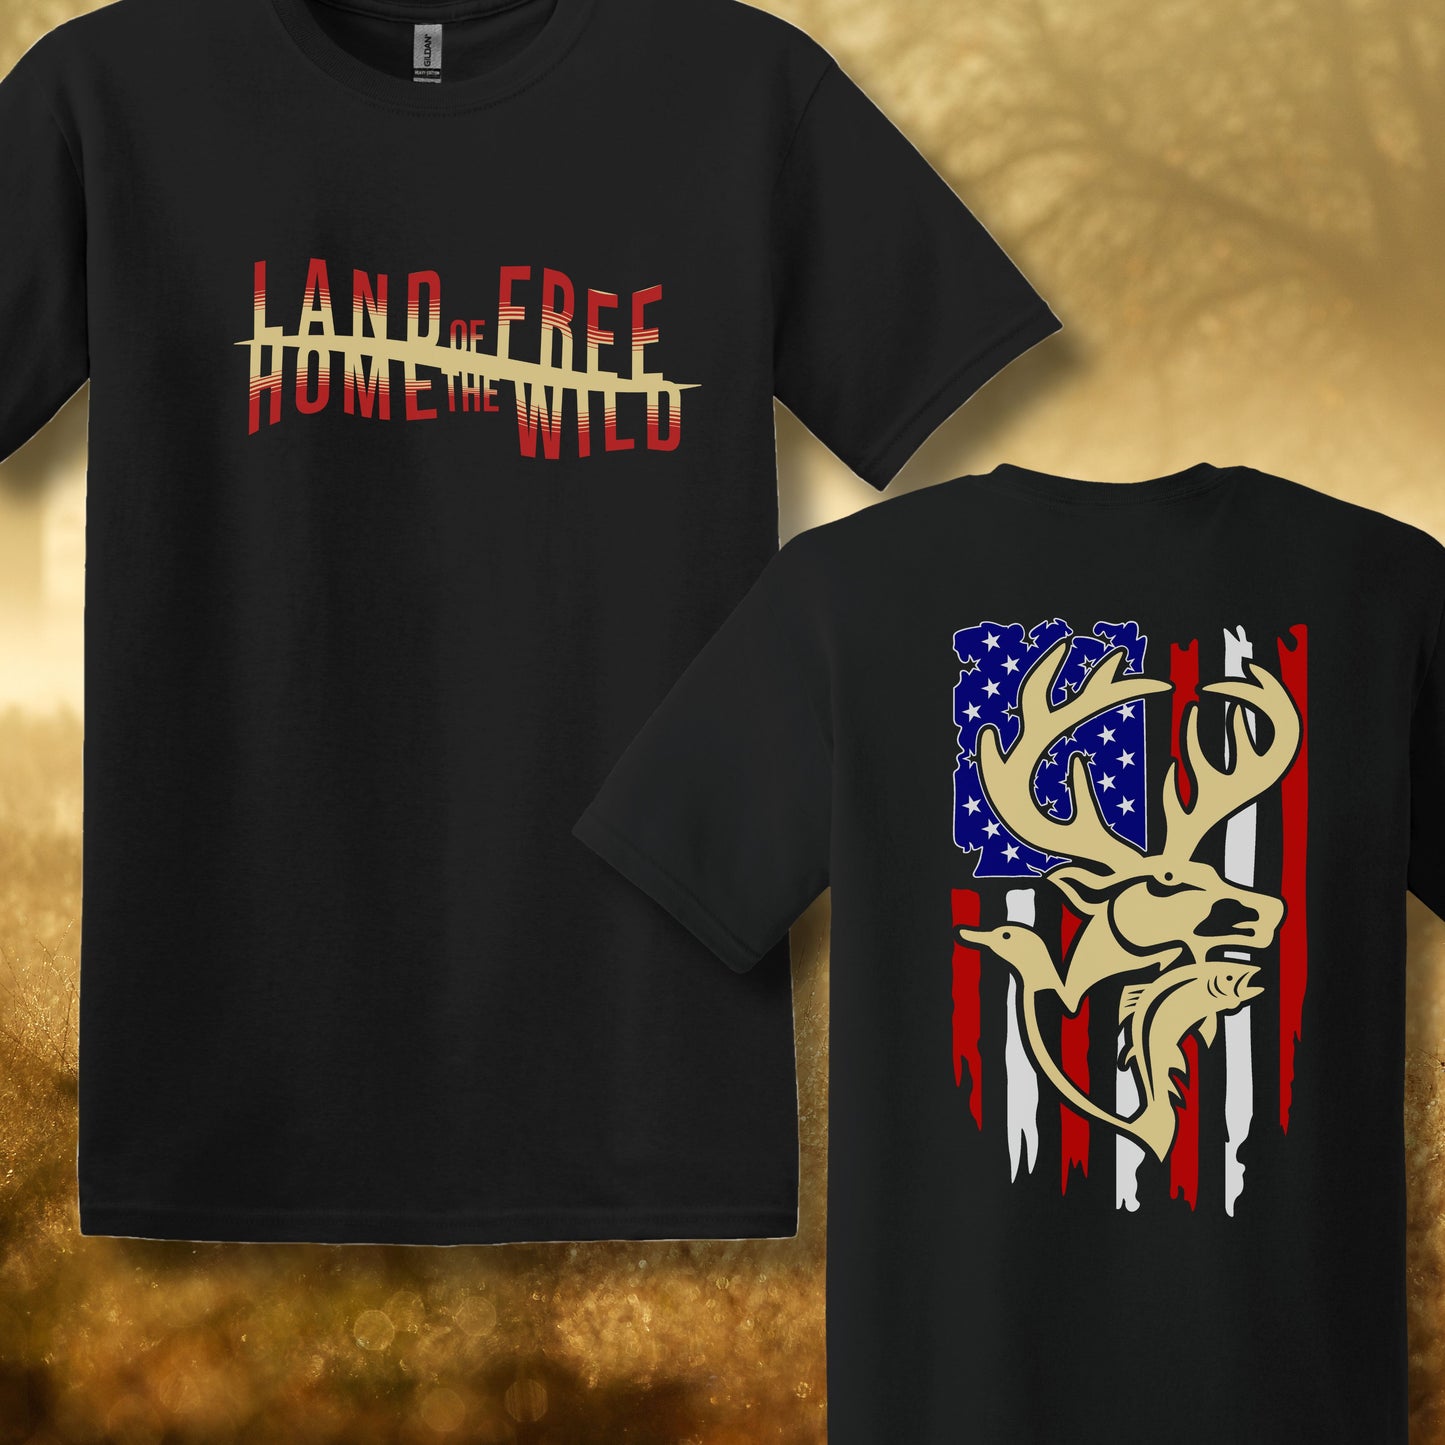 Land of the Free Home of the Wild Hunting and Fishing tee, Perfect gift for Duck, Fishing, and Deer Hunters, Dad husband and boyfriend gifts - Canadohta Custom Creations LLC